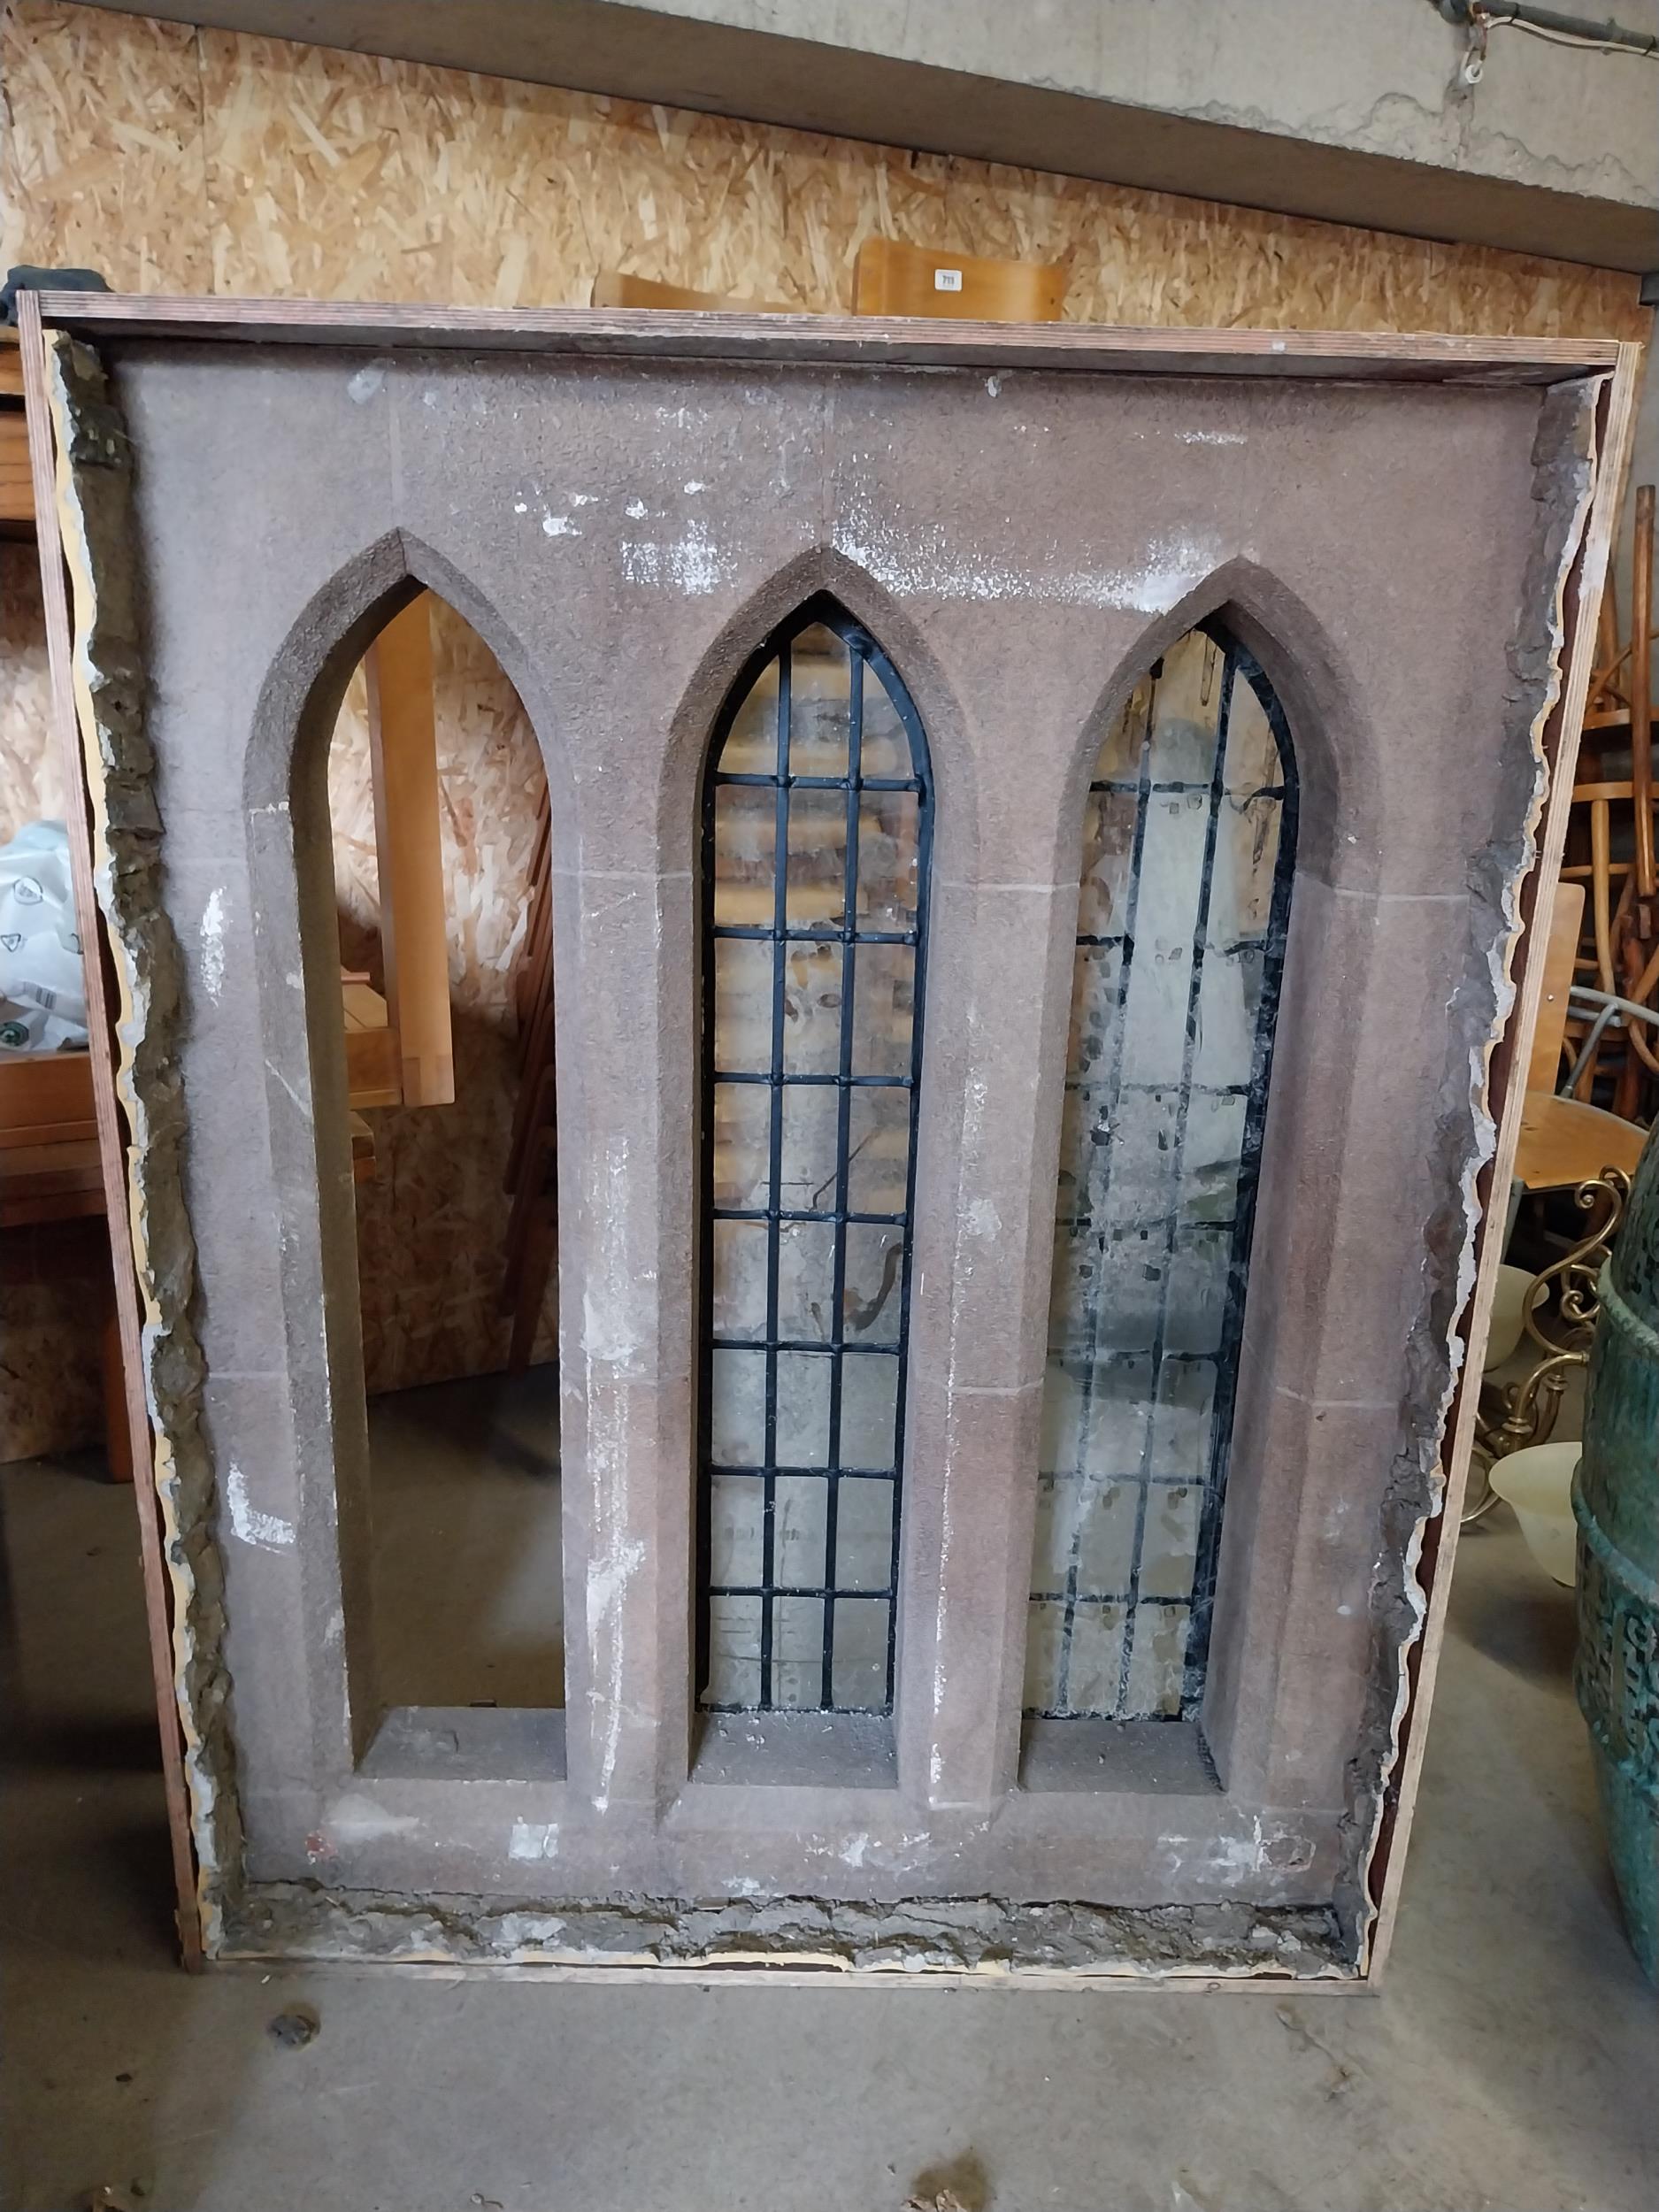 Film prop fibre glass window in the Gothic style with glass panels {156 cm H x 124 cm W x 26 cm D}.